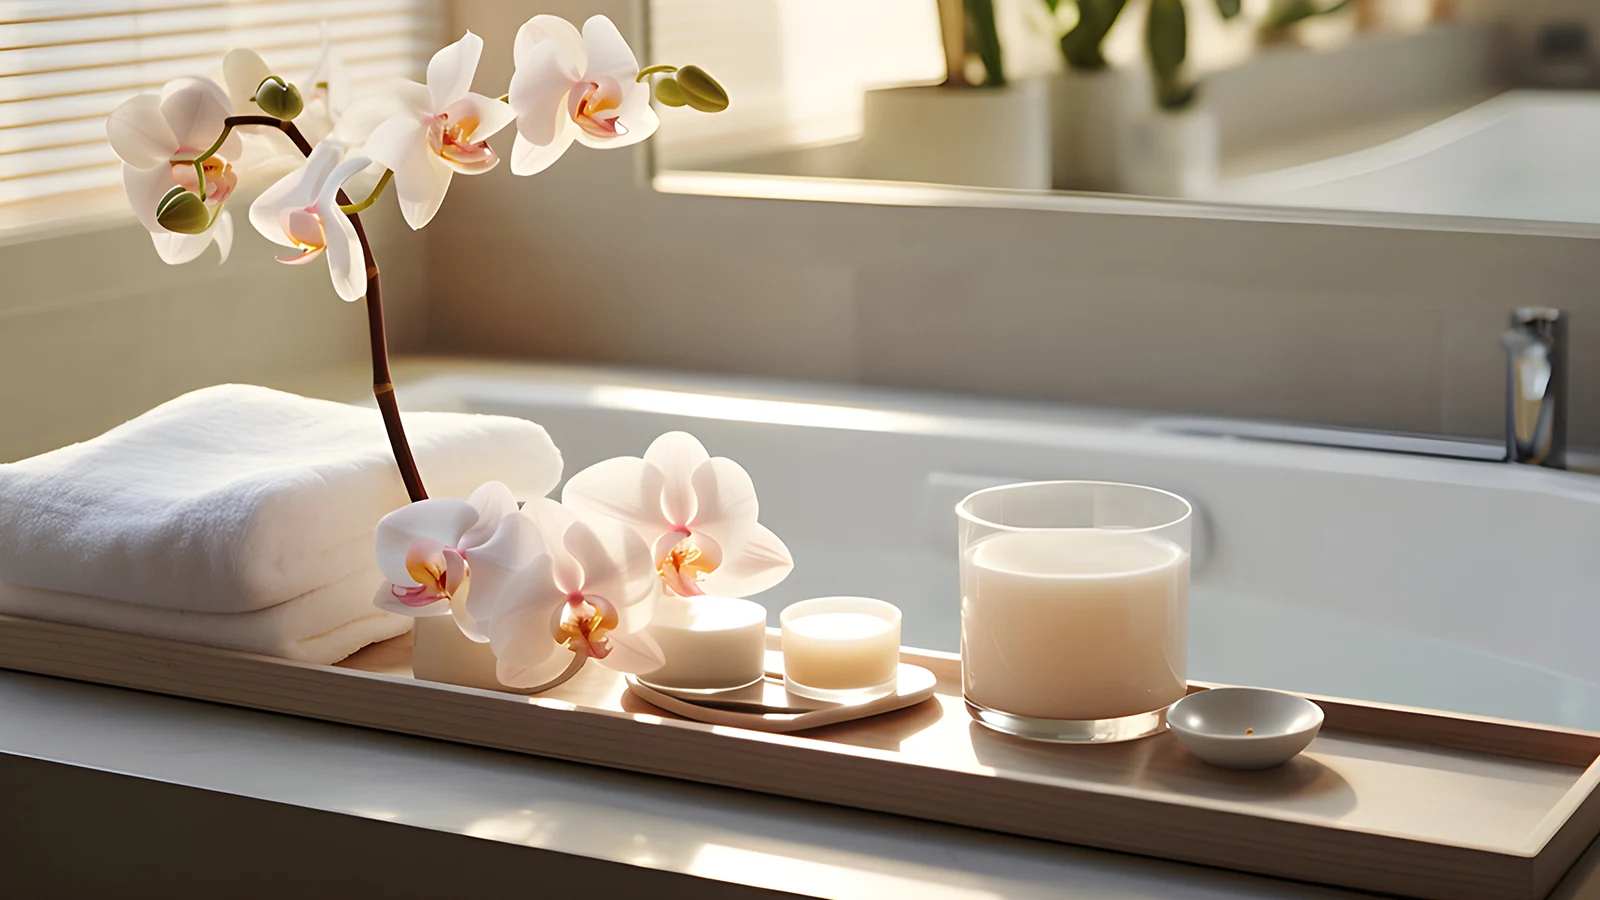 Discover creative ways to decorate an apartment bathroom with a wooden tray adorned by a beautiful flower and accompanied by a glass of milk.